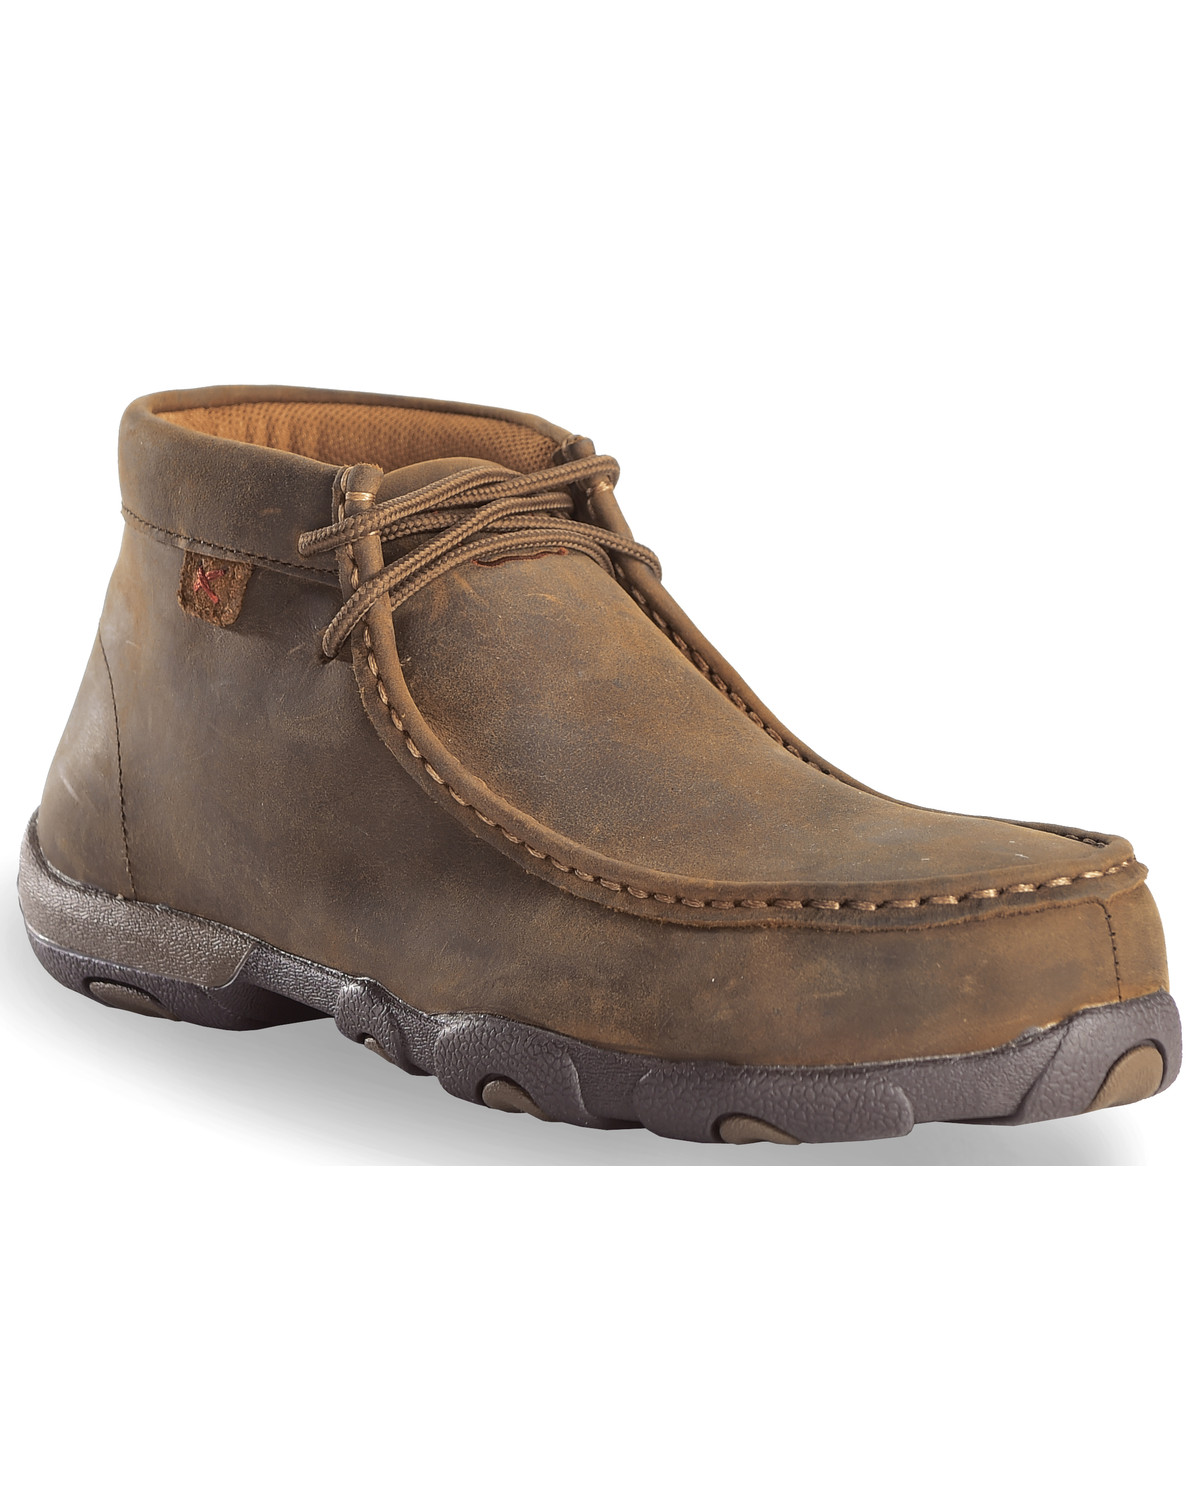 Driving Moc Work Shoes - Steel Toe 